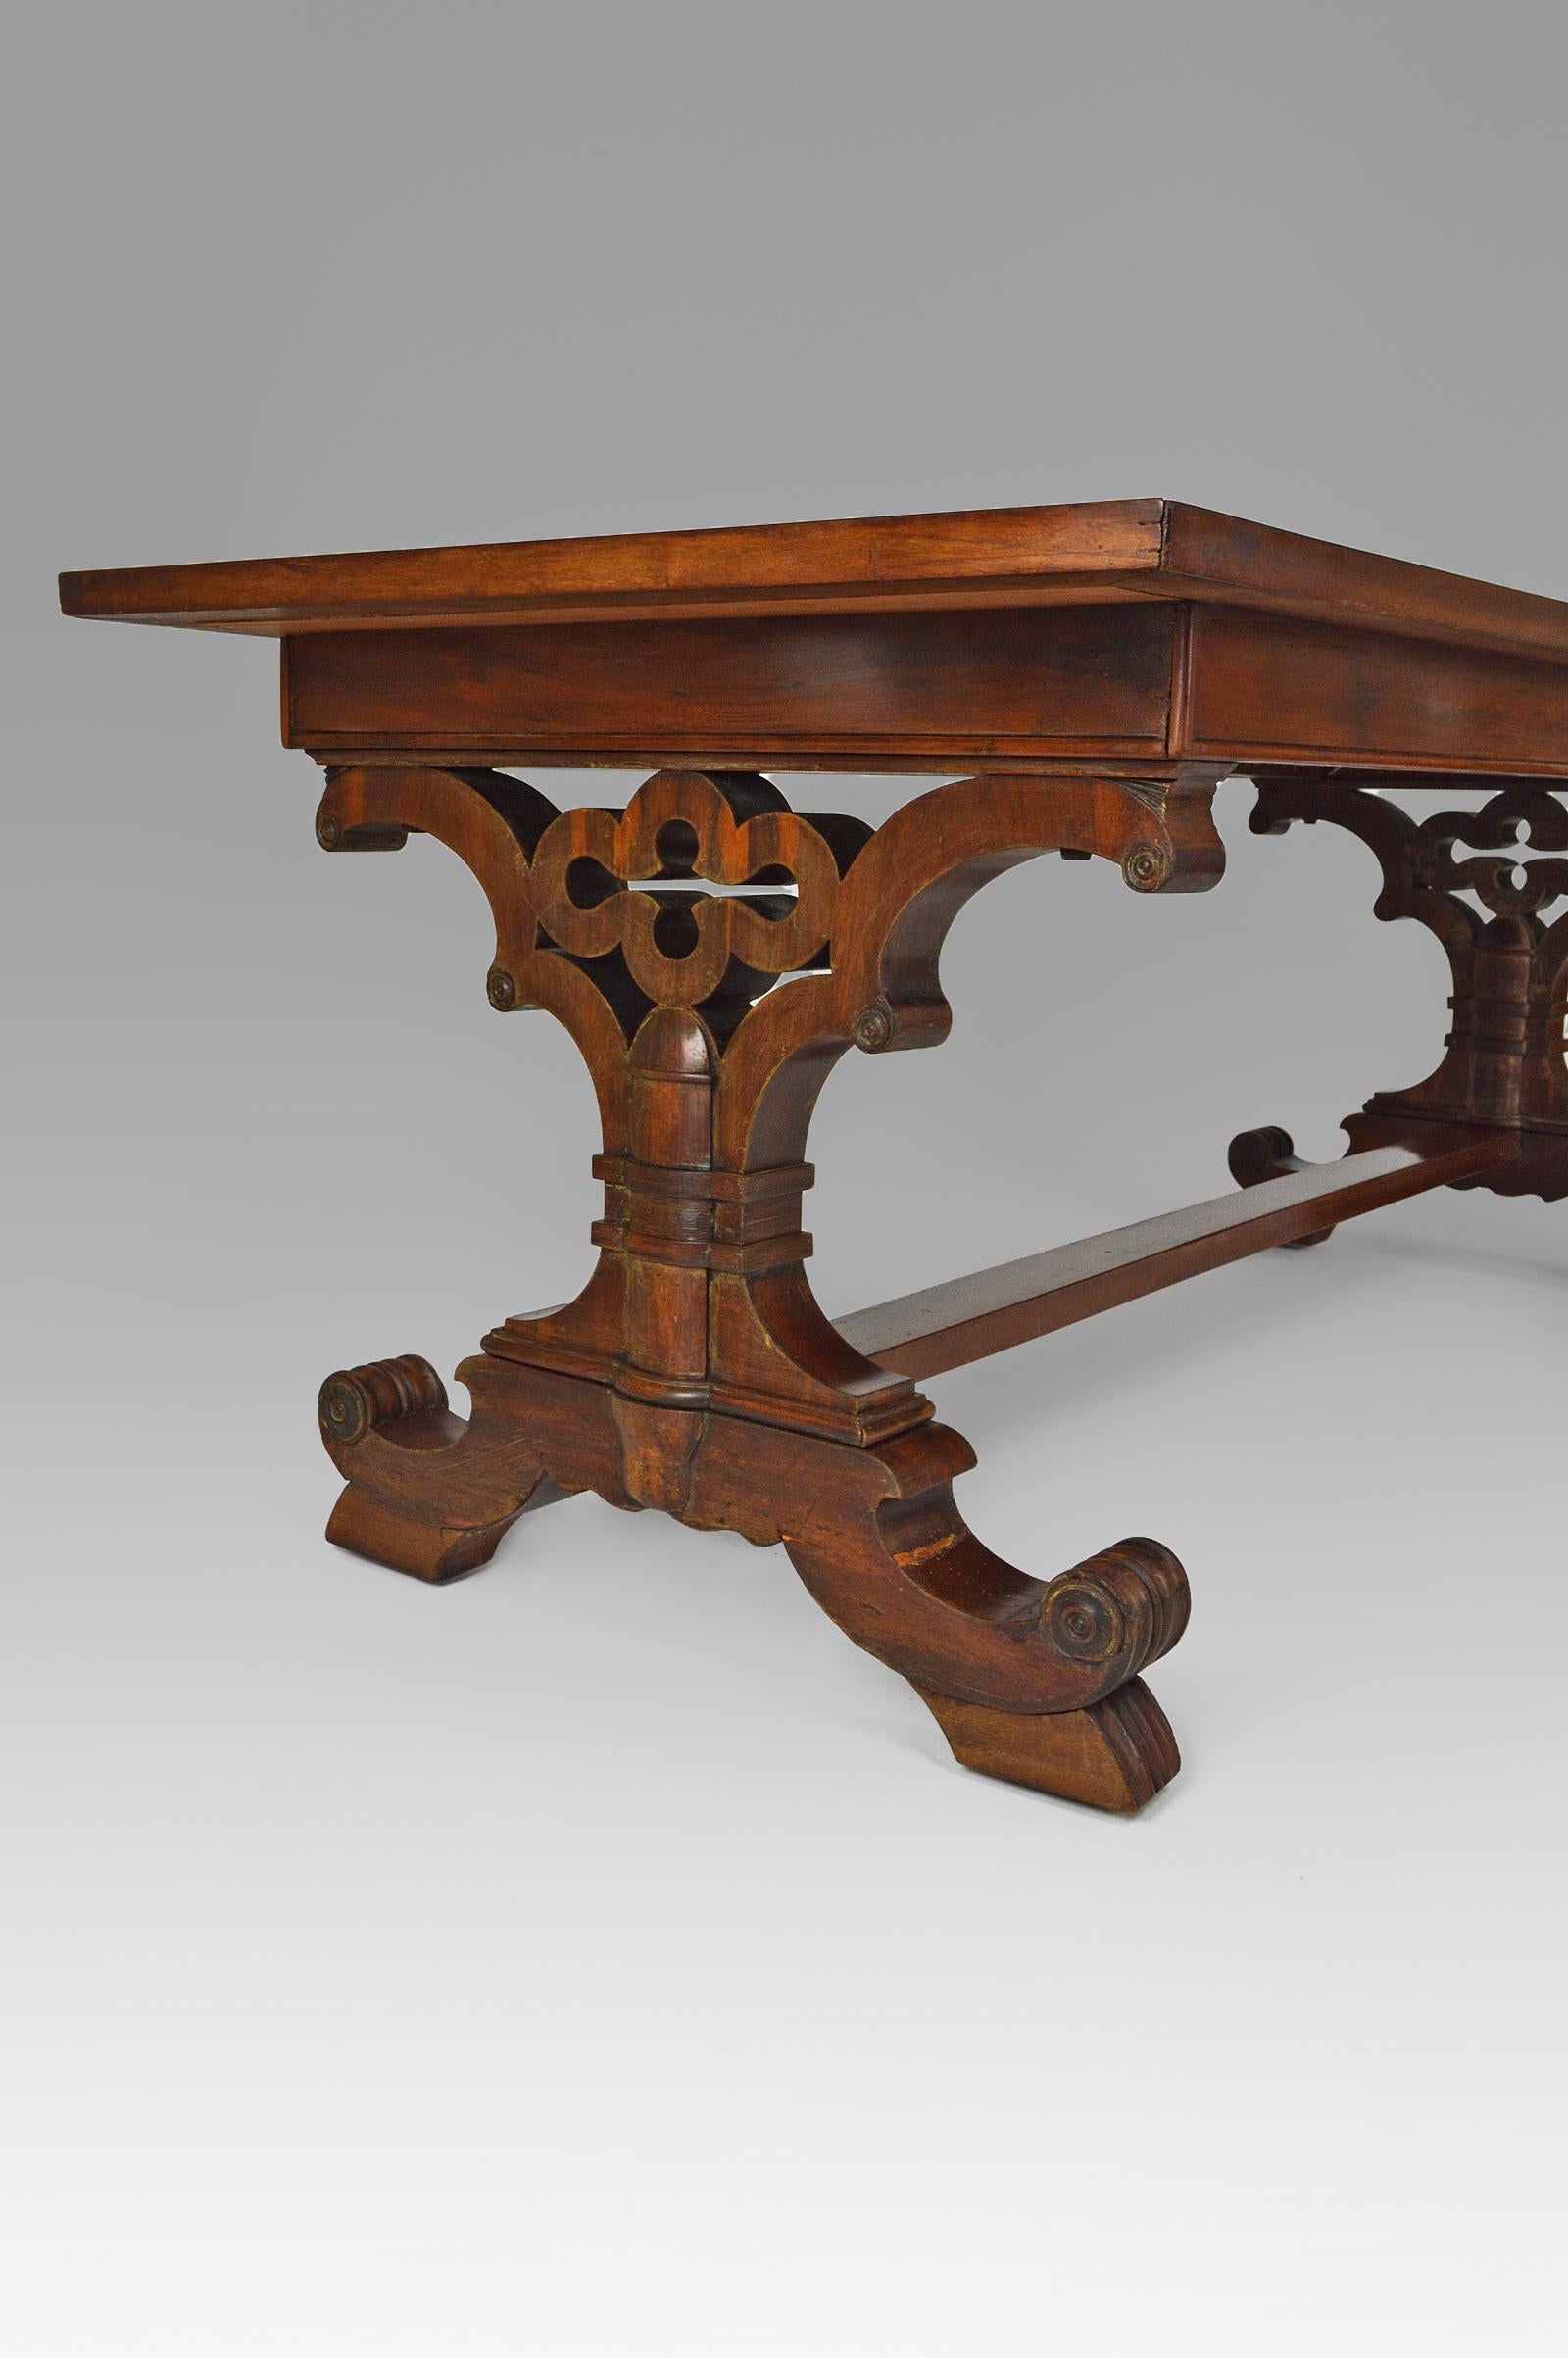 Gothic Revival Dining Table in Mahogany, Victorian Era, circa 1840 For Sale 8